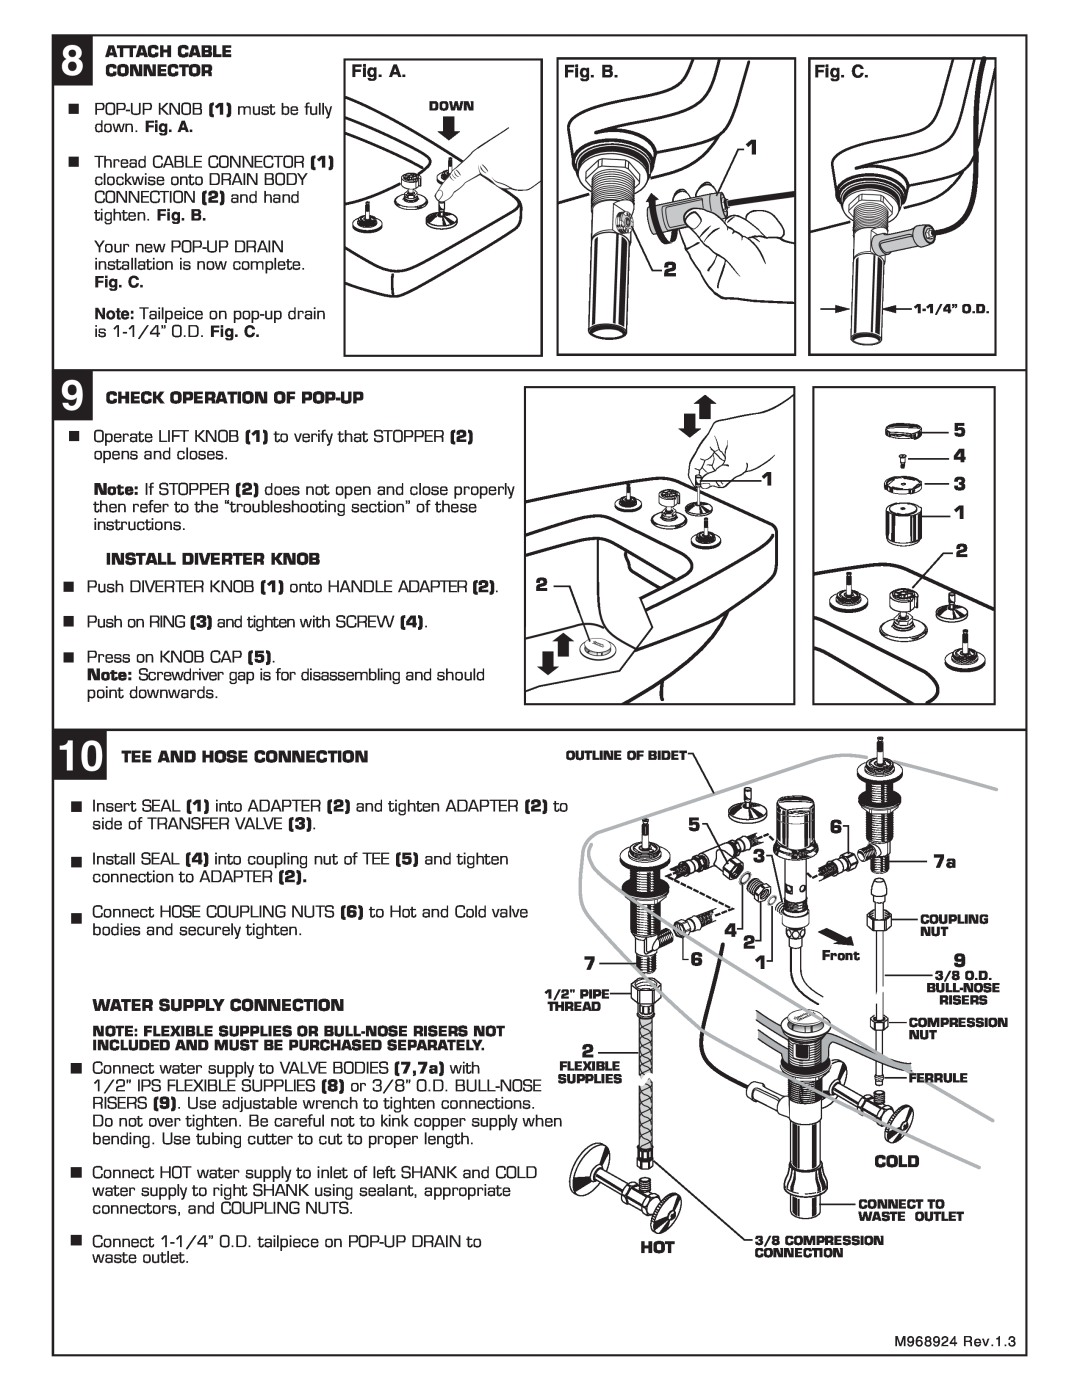 American Standard 2064.4 Fig. C, Attach Cable, Connector, down. Fig. A, Check Operation Of Pop-Up, Install Diverter Knob 